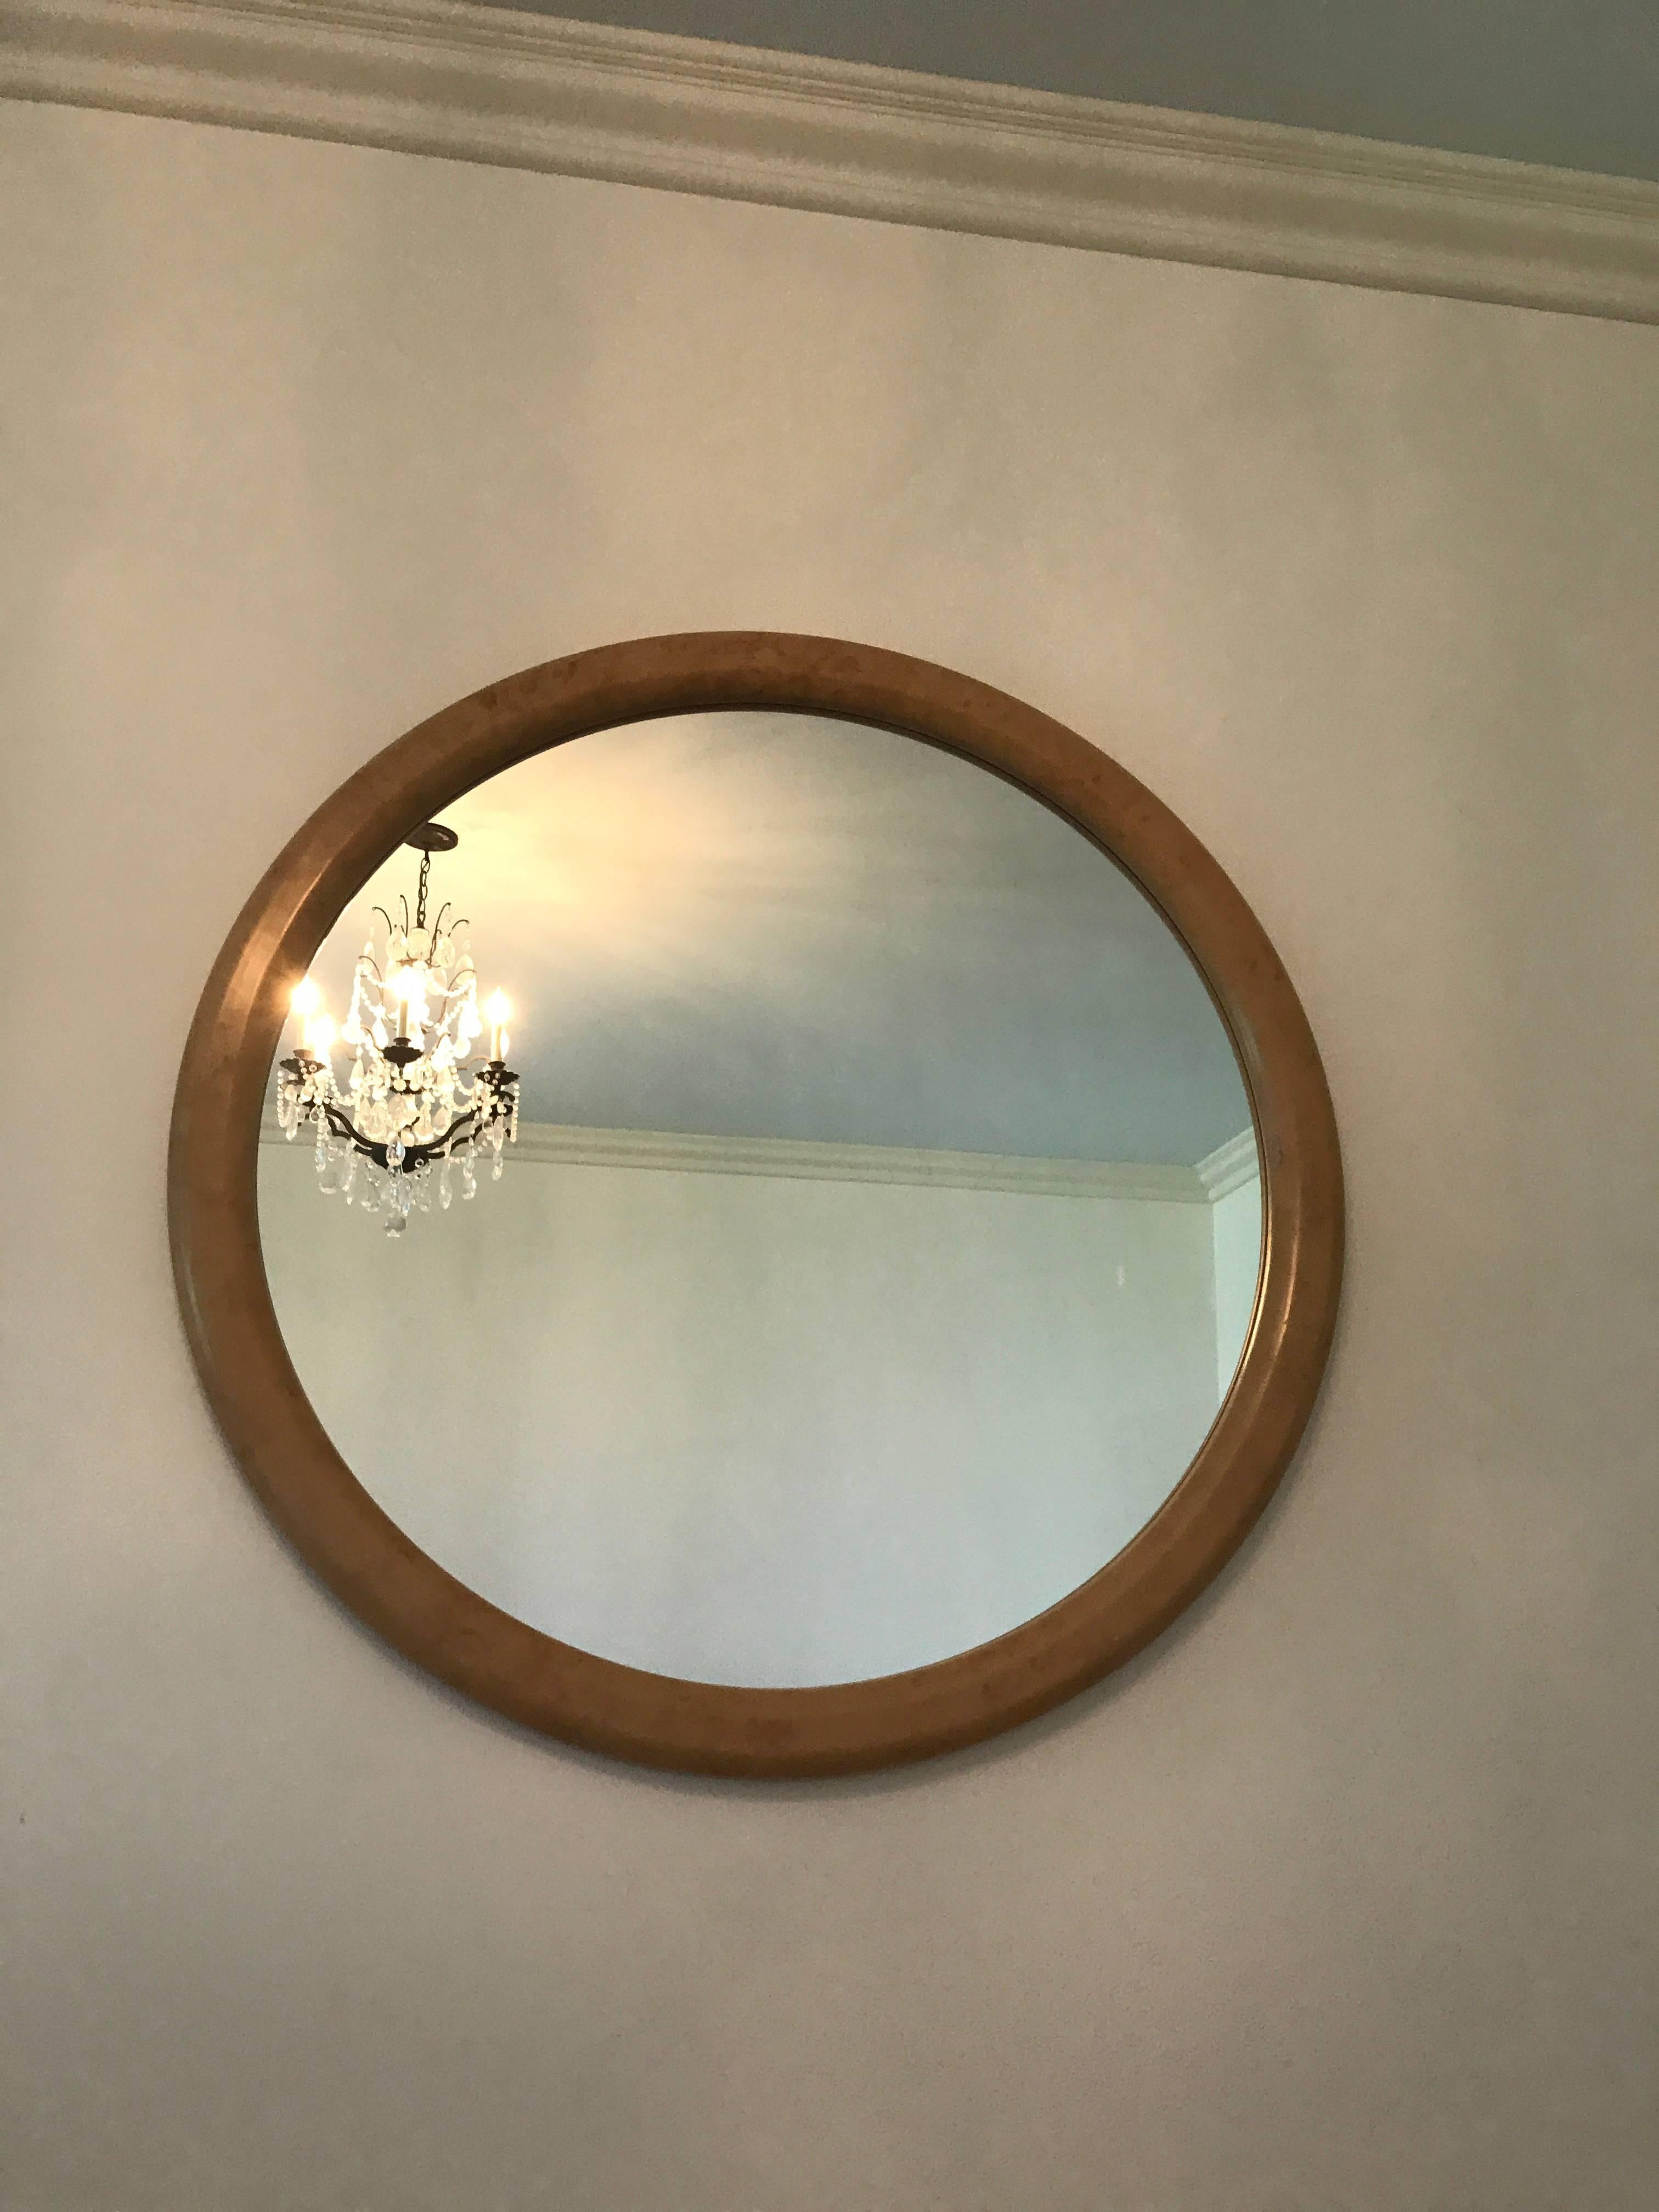 American Round Faux Goatskin Lacquer Mirror from Custom-Made Master Bedroom Suite